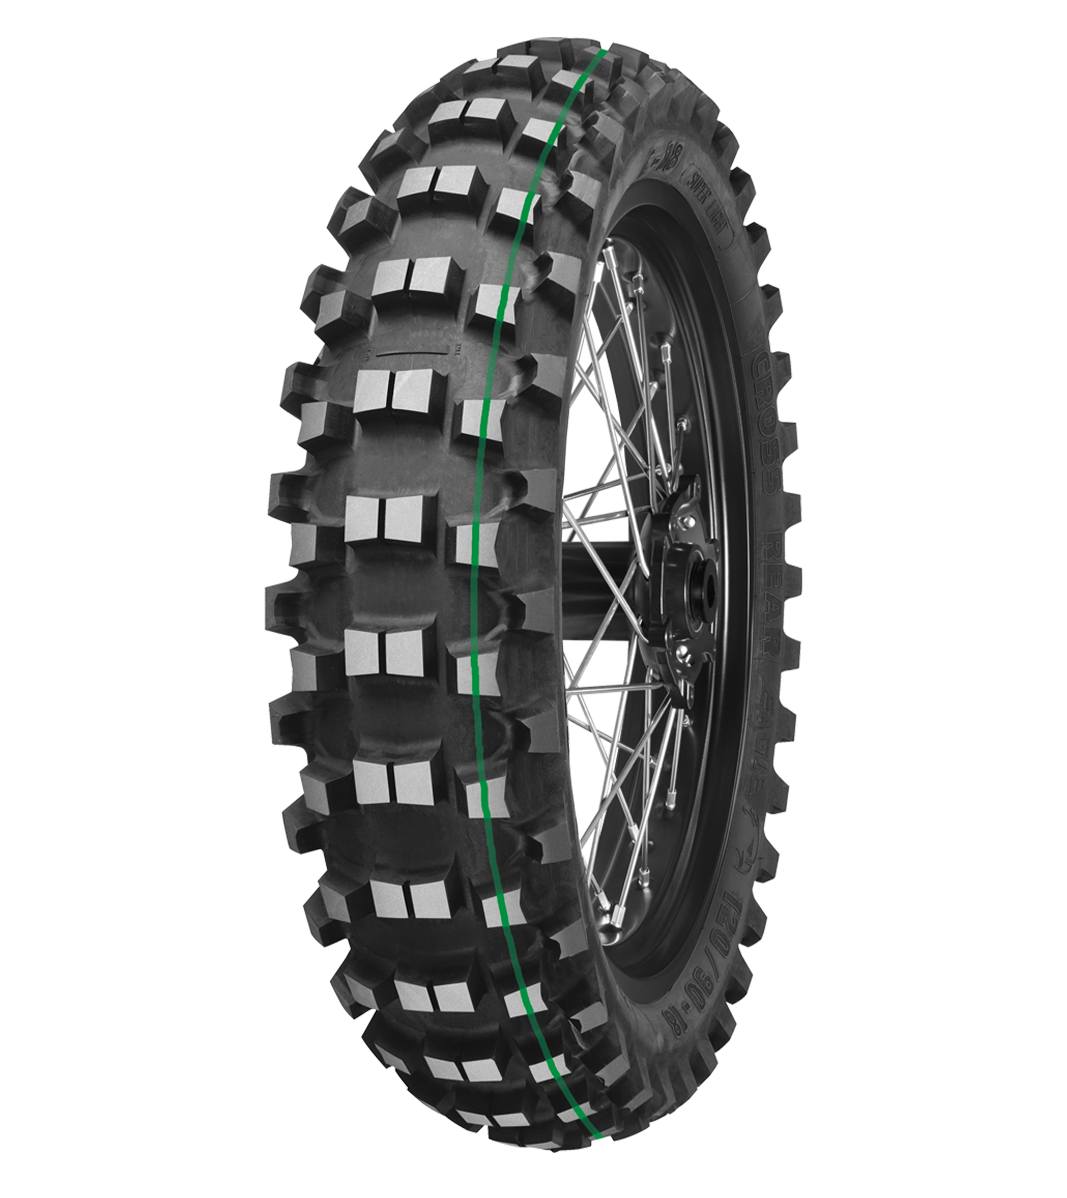 Mitas C-18 EAGLE 110/90-19 Enduro Competition Off-Road SUPER LIGHT 62M Green Tube Rear Tire, 226614, 110/90-19, C-18 Eagle, Enduro, Enduro Competition, Off-Road, Rear, Tires - Imported and distributed in North &amp; South America by Lindeco Genuine Powersports - Premier Powersports Equipment and Accessories for Motorcycle Enthusiasts, Professional Riders and Dealers.